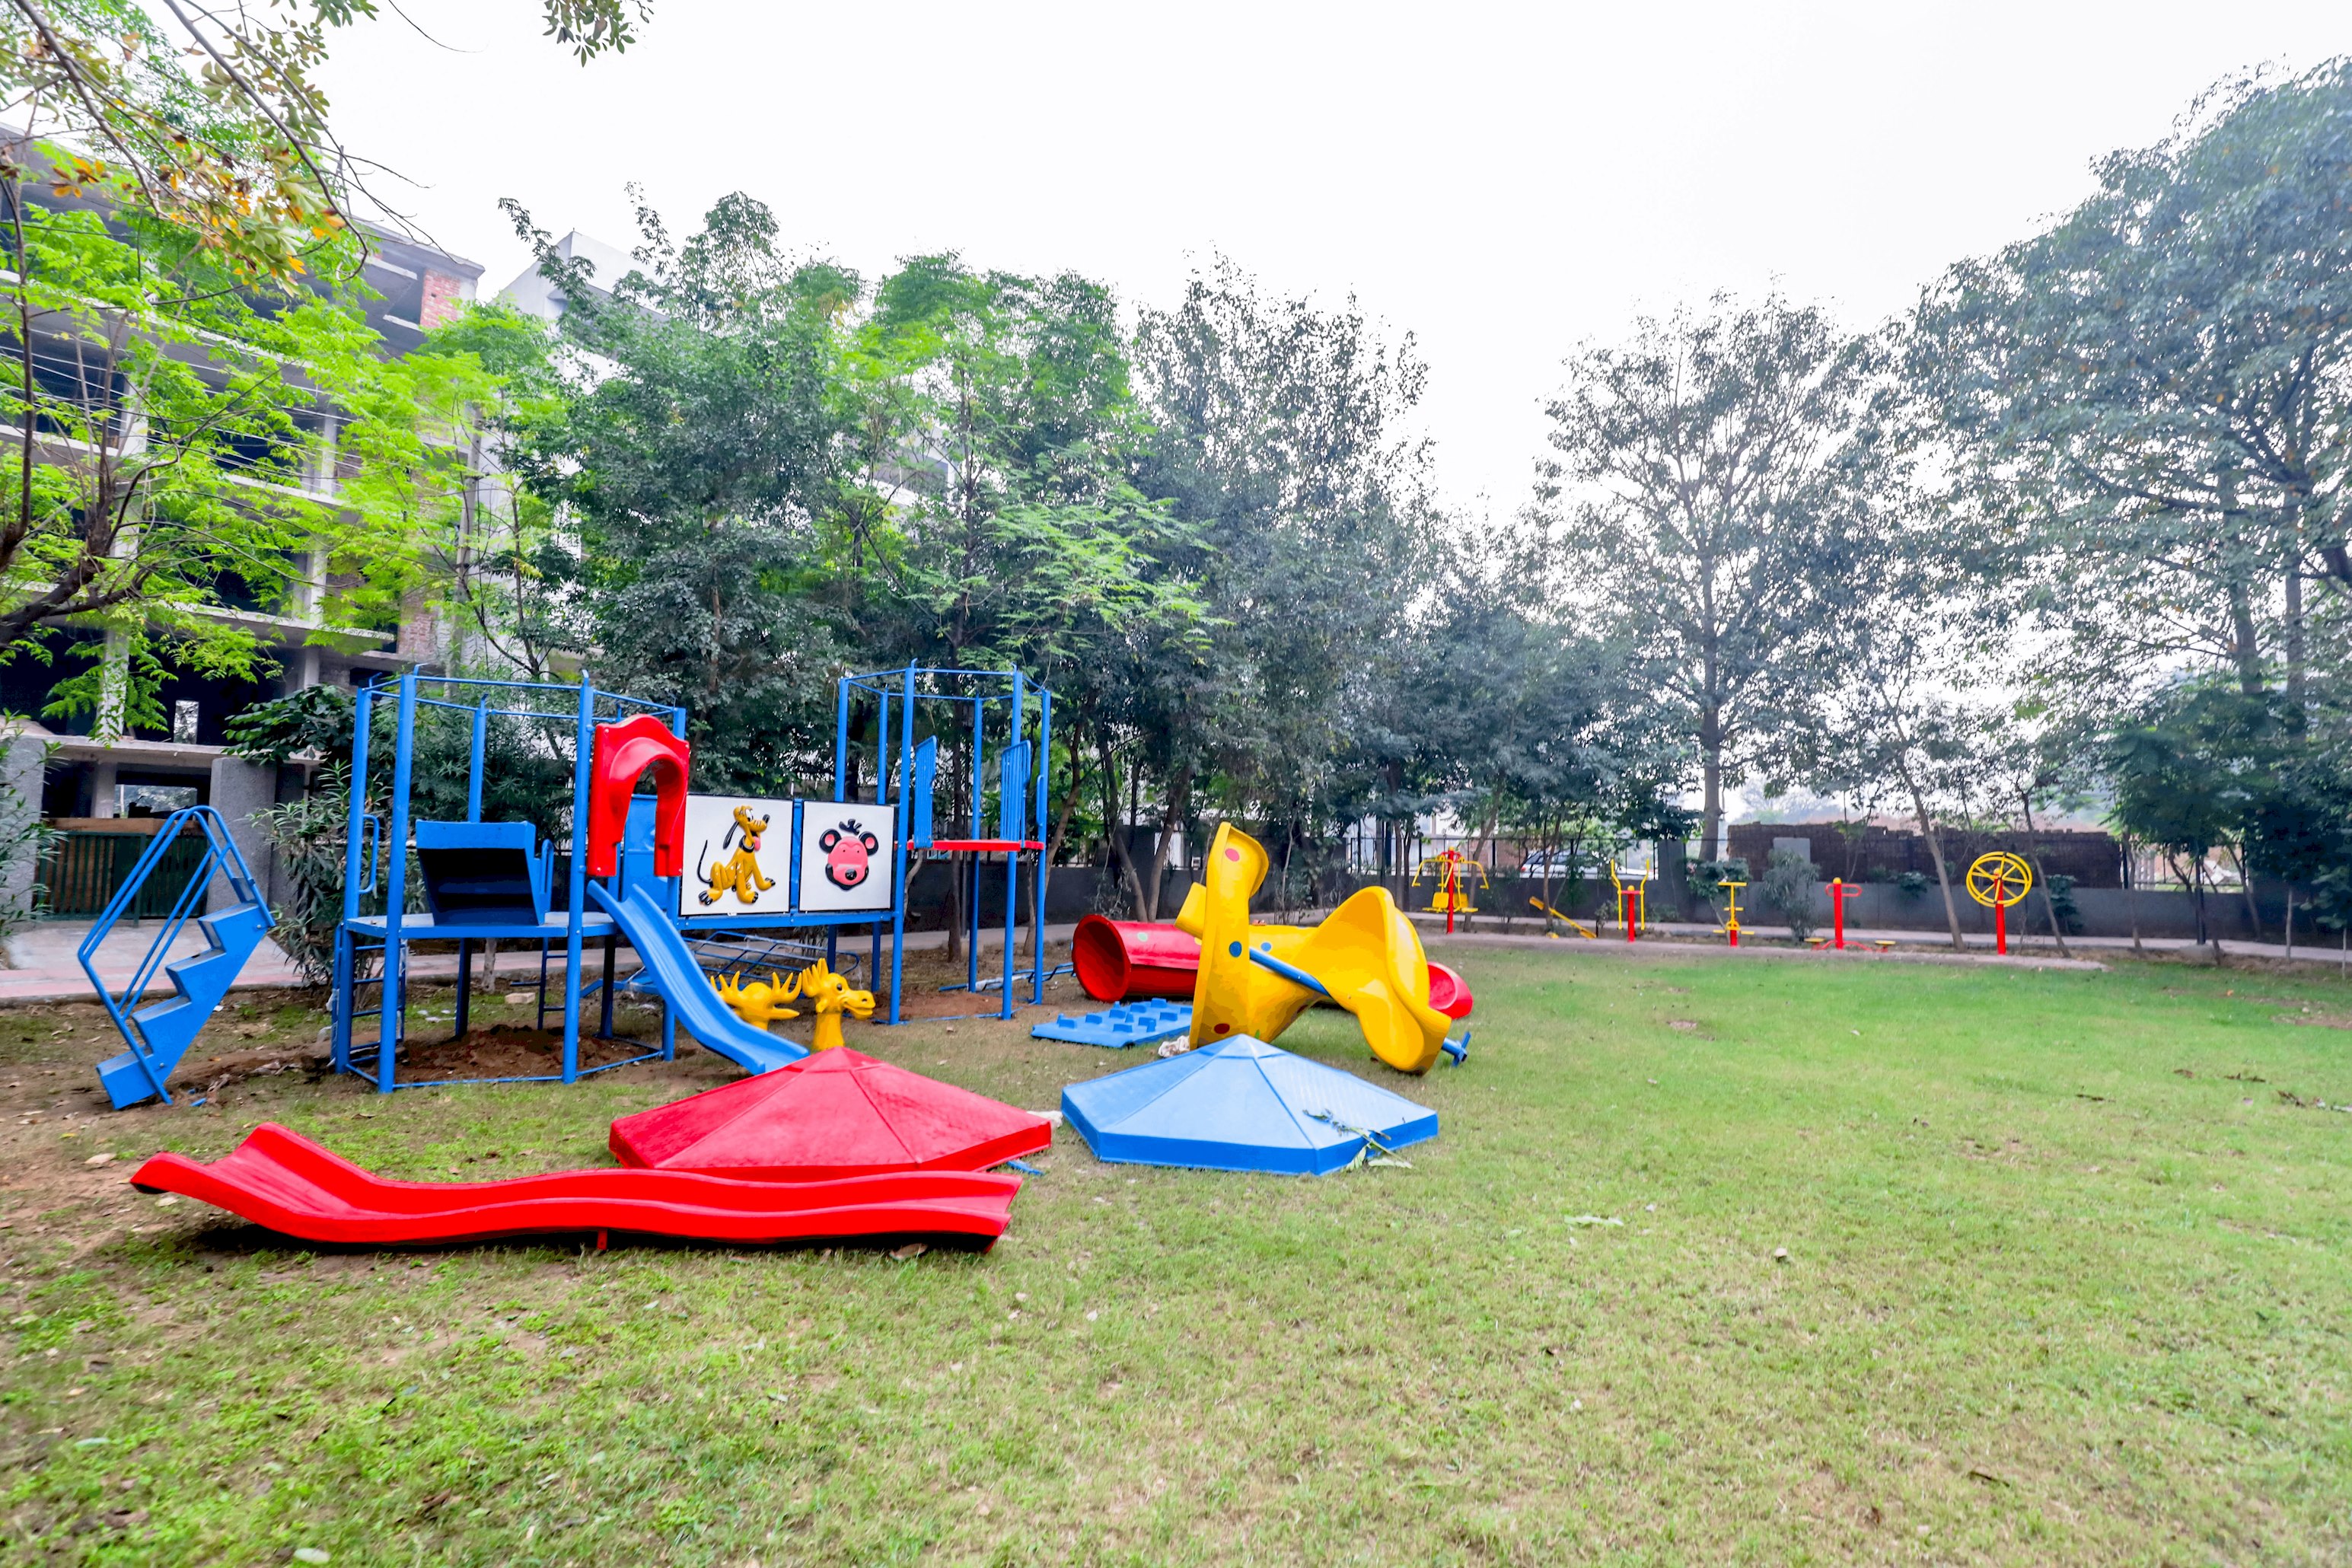 A vibrant park scene featuring children enjoying rides and games, with colorful play equipment and joyful laughter filling the air
